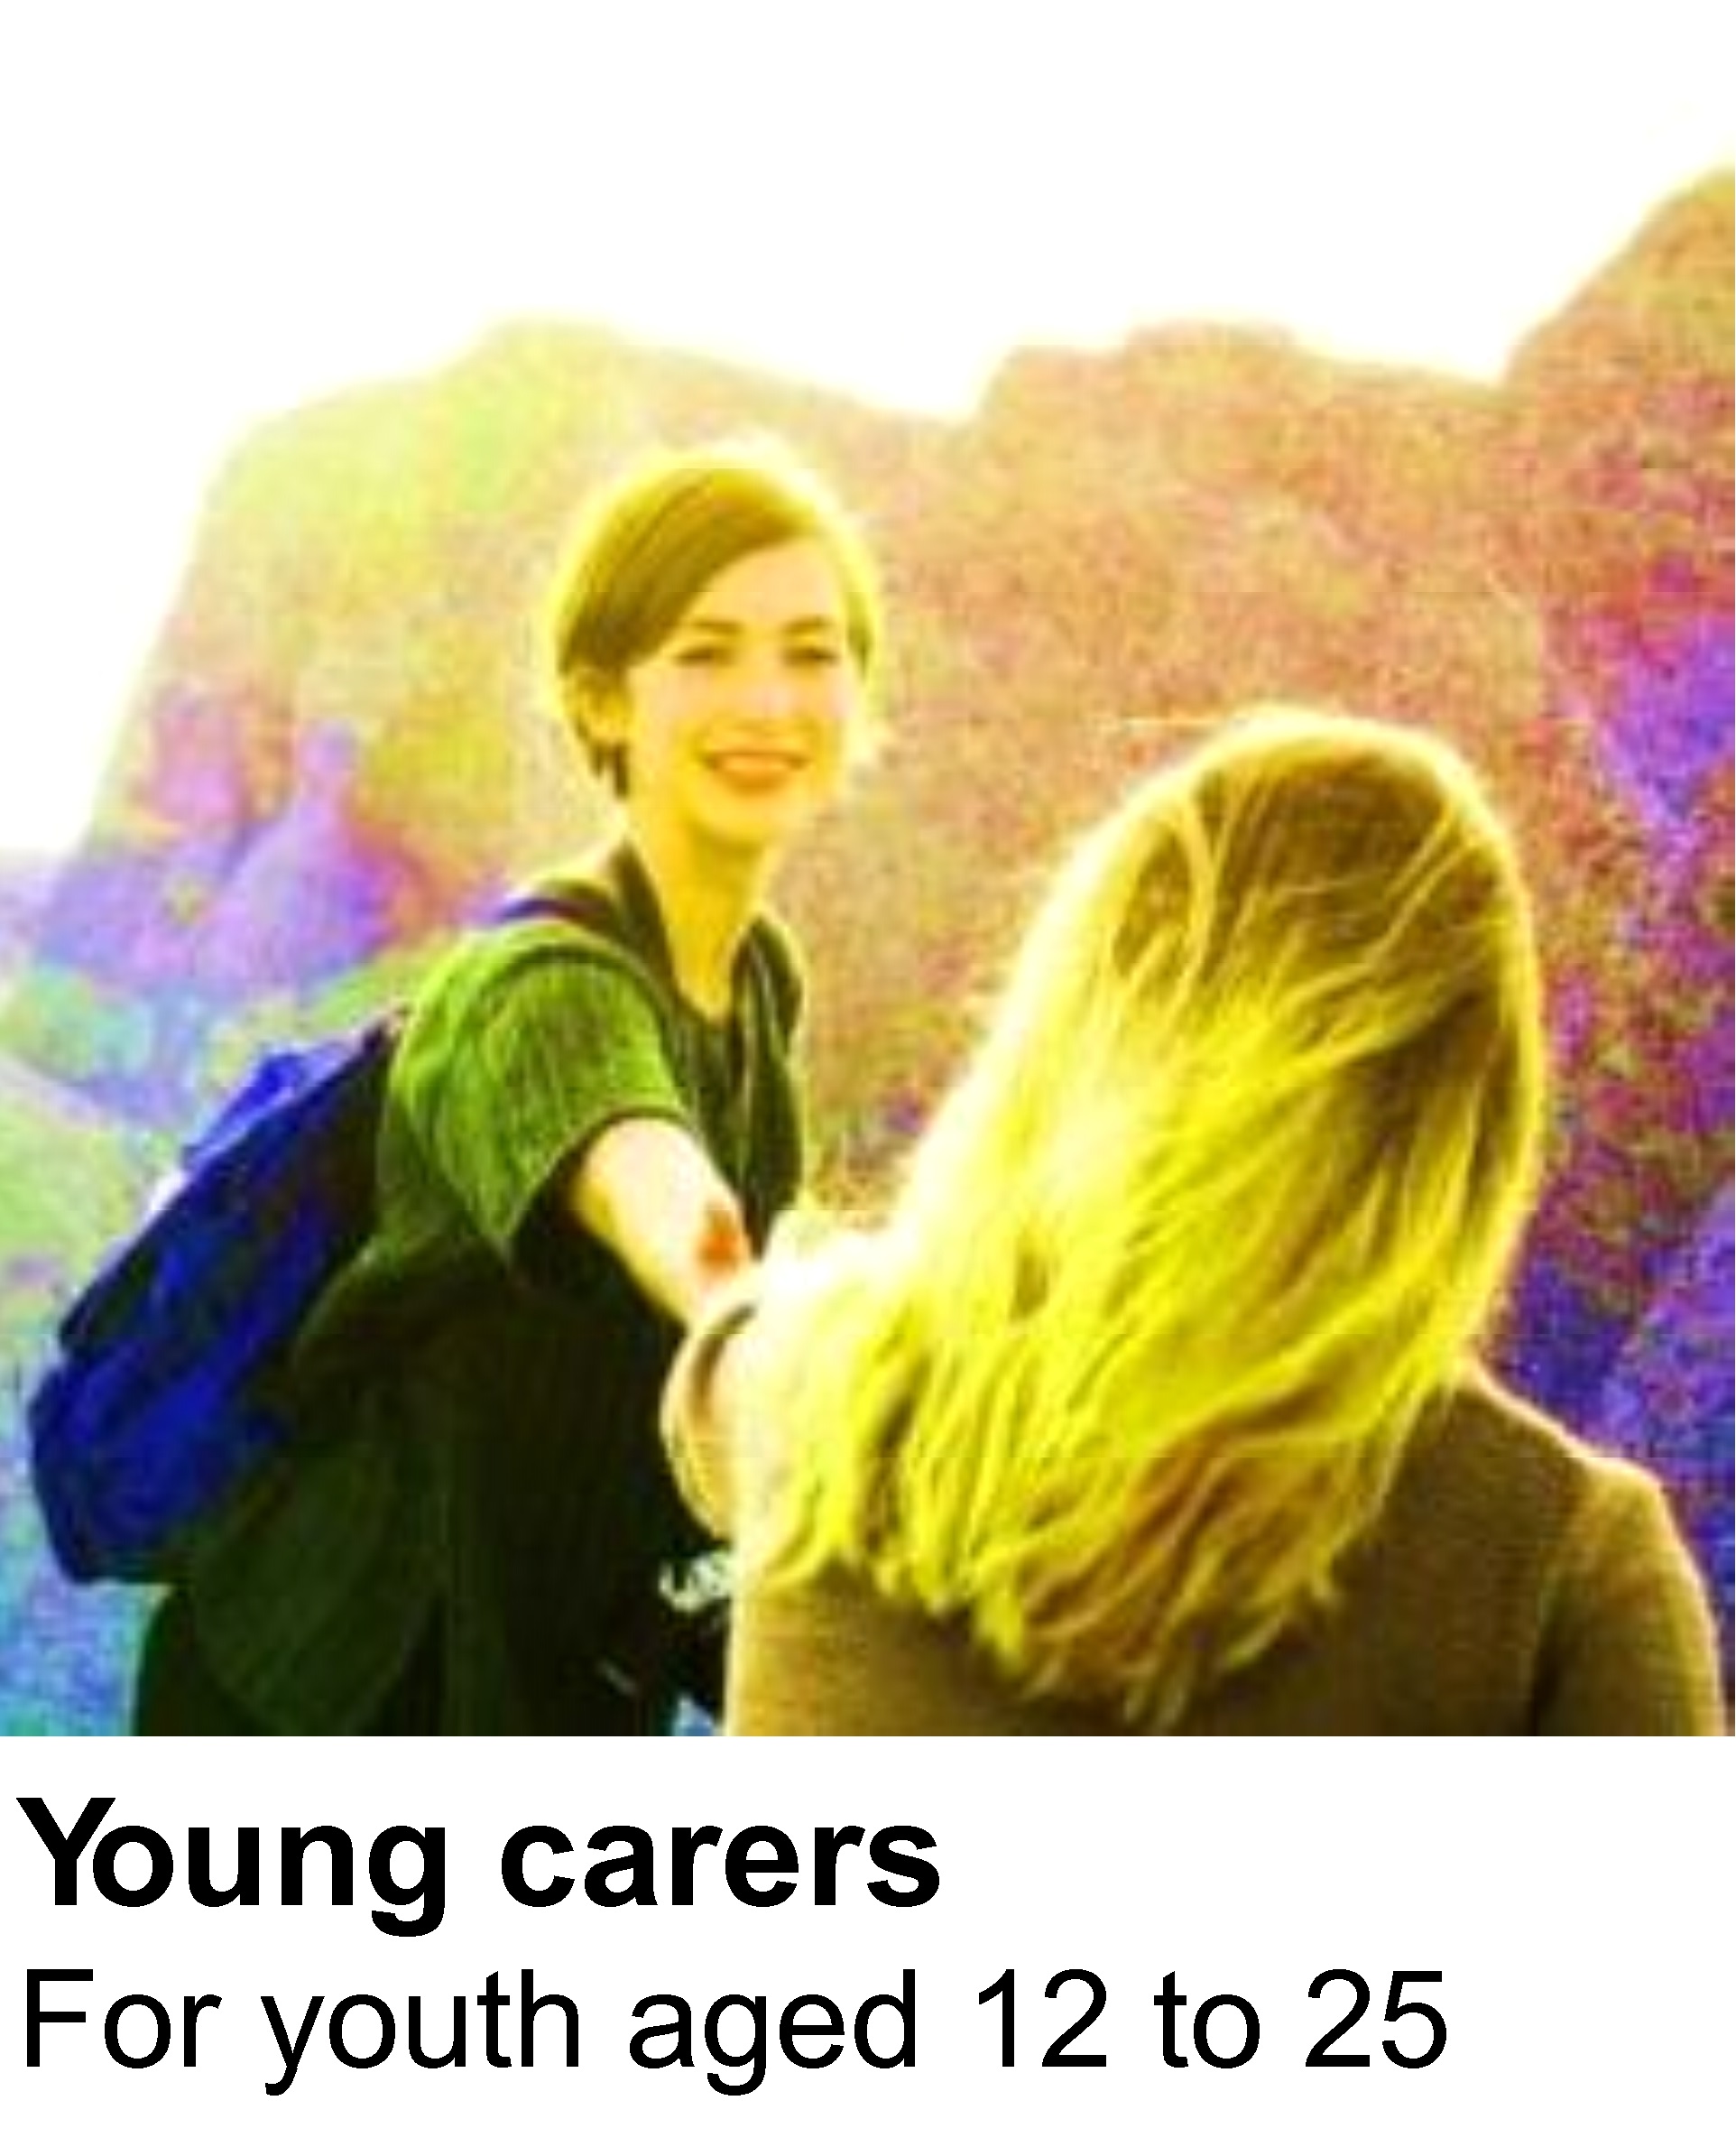 Resources for young carers